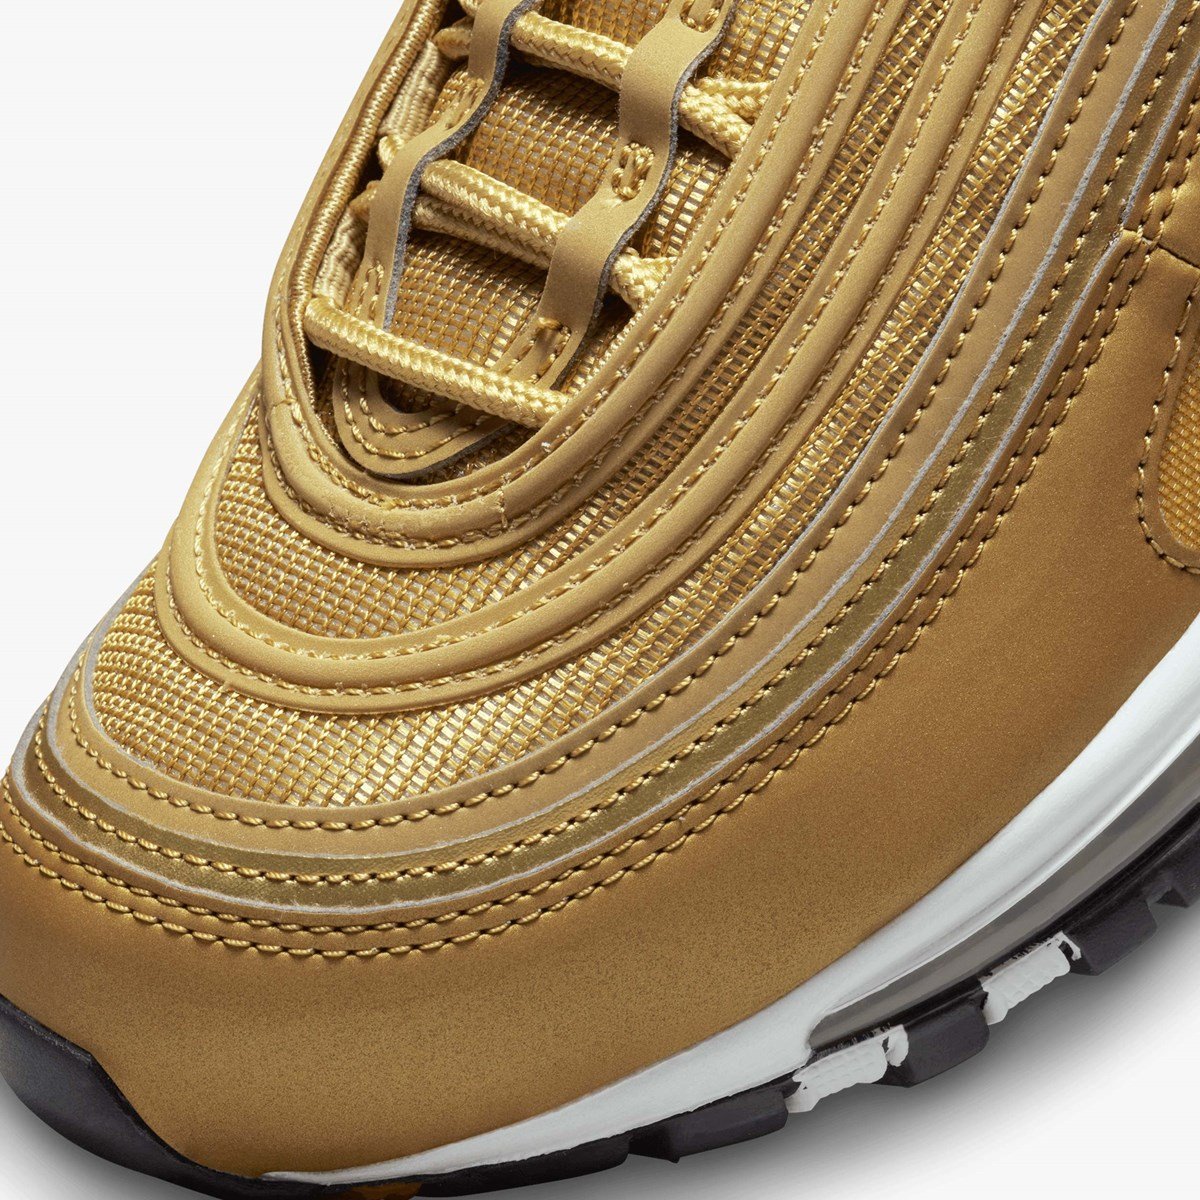 Basket Nike air max 97 Gold édition